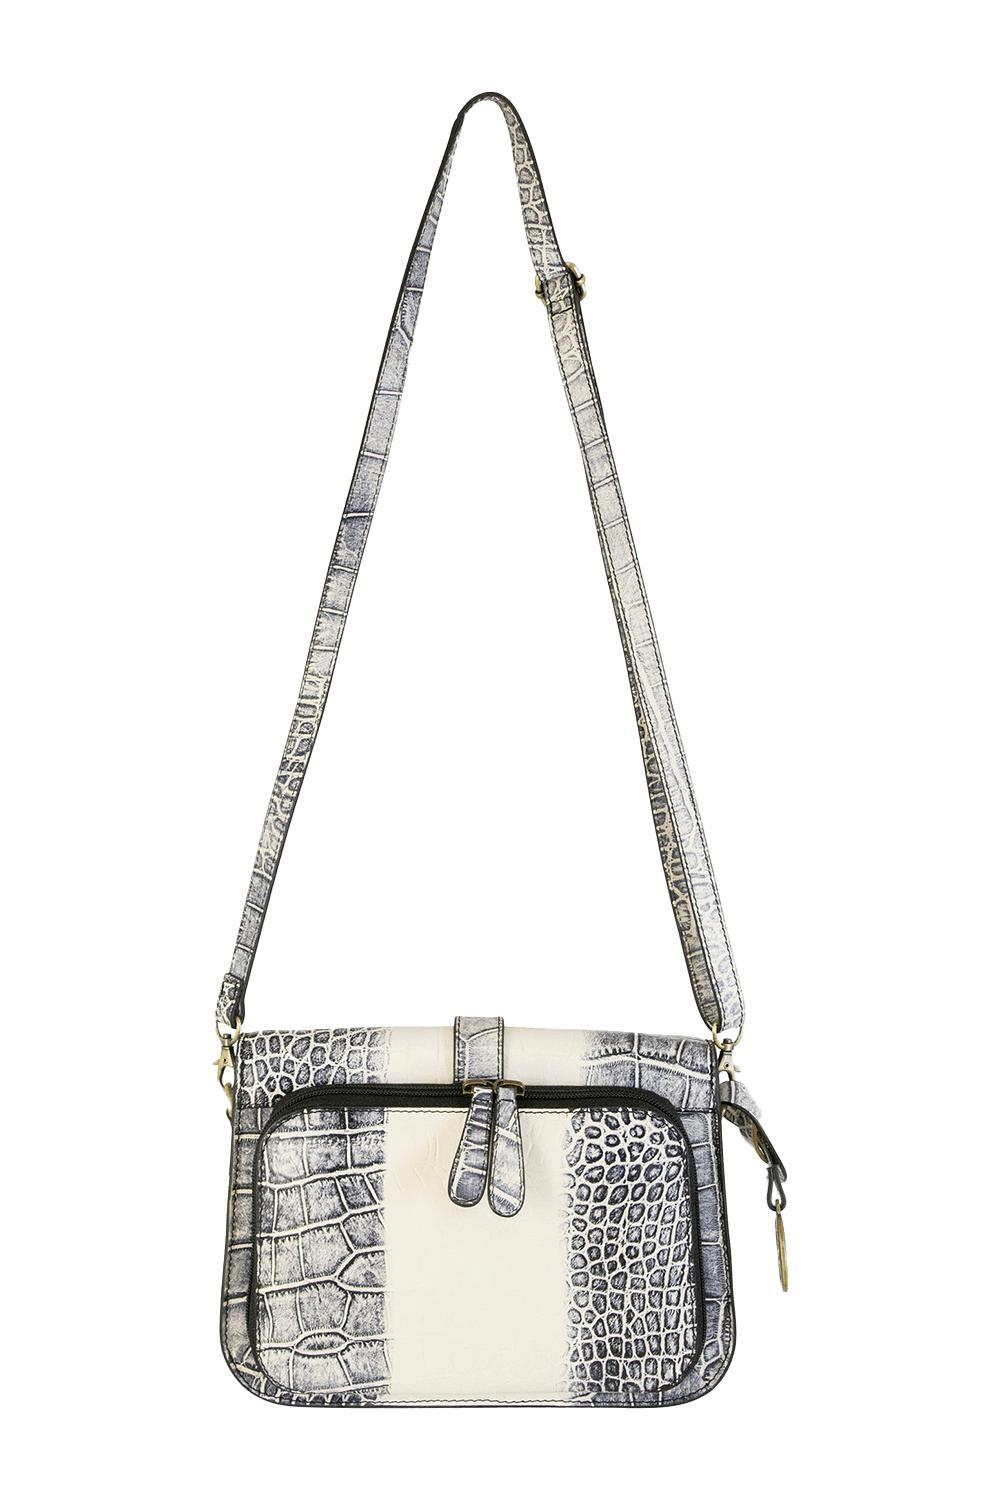 Smith & Wesson Concealed Carry Croc Crossbody Purse